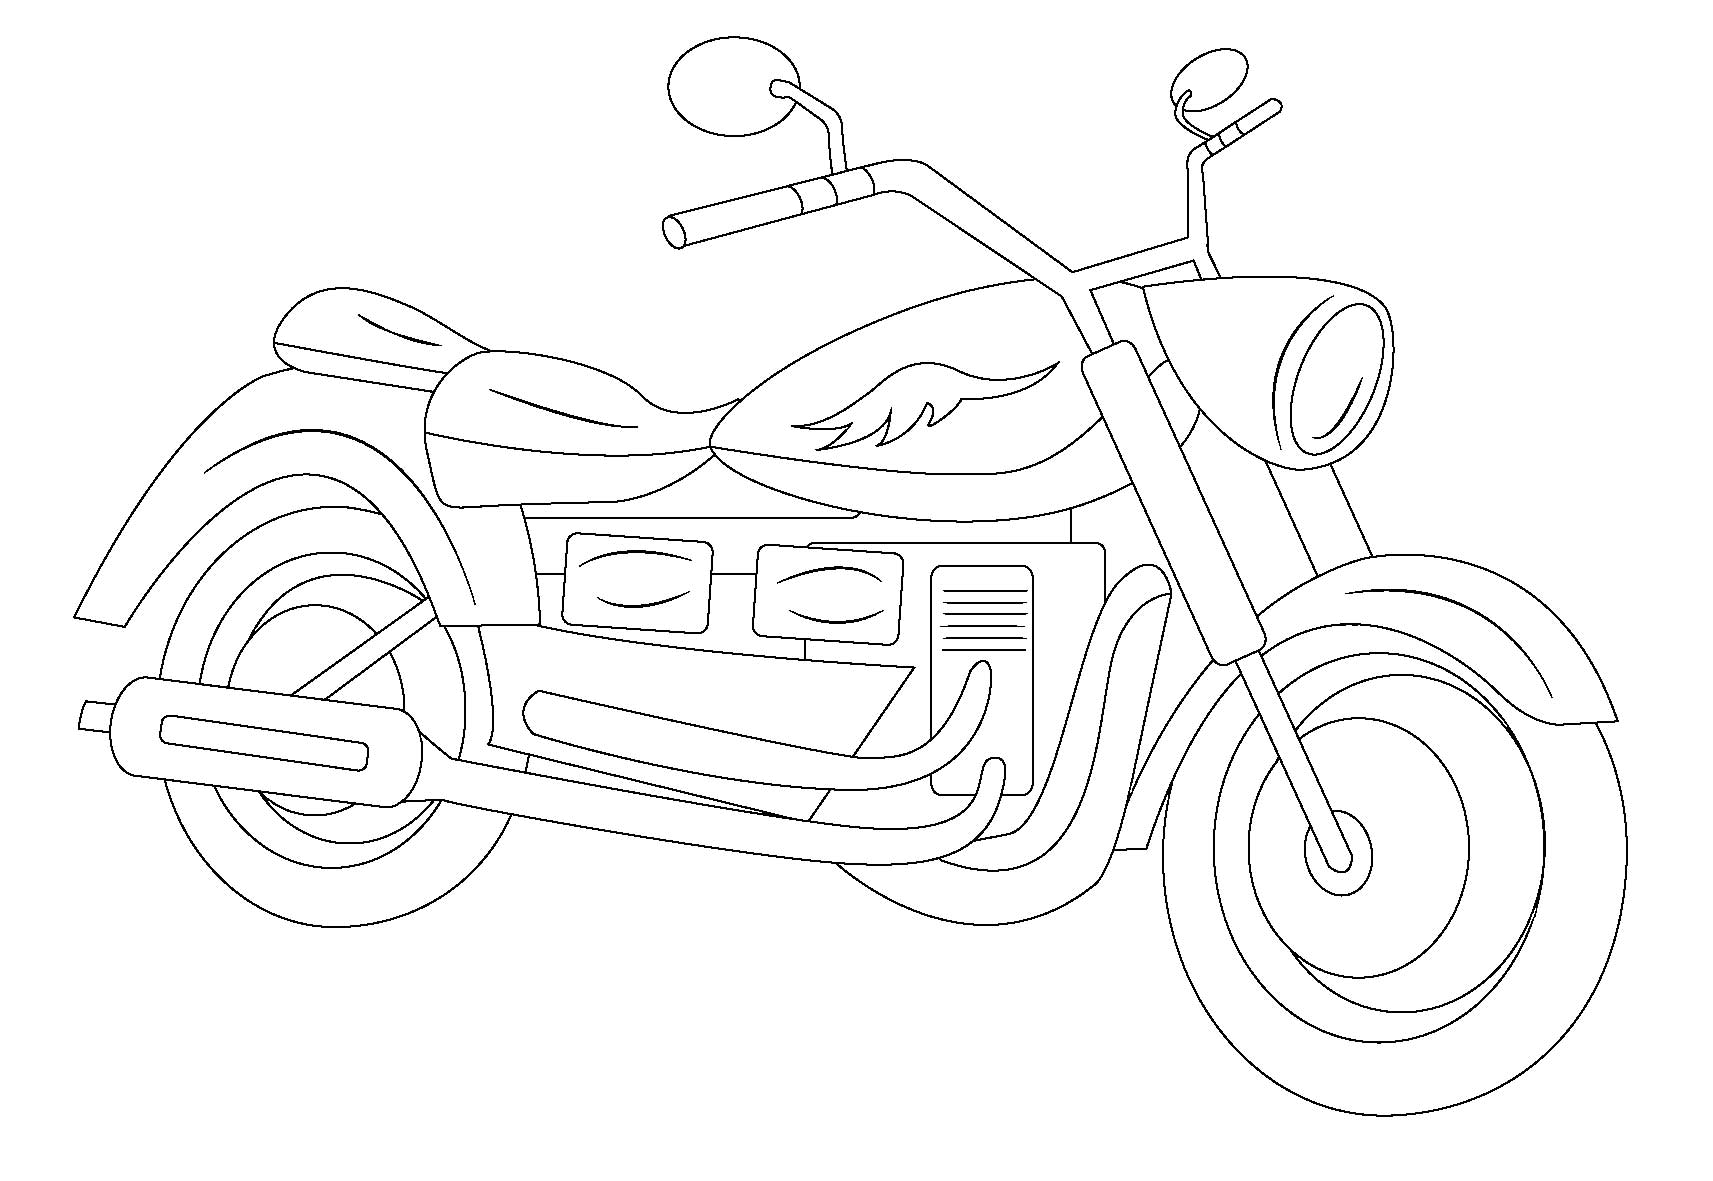 Printable Motorcycle Coloring Pages for Preschoolers